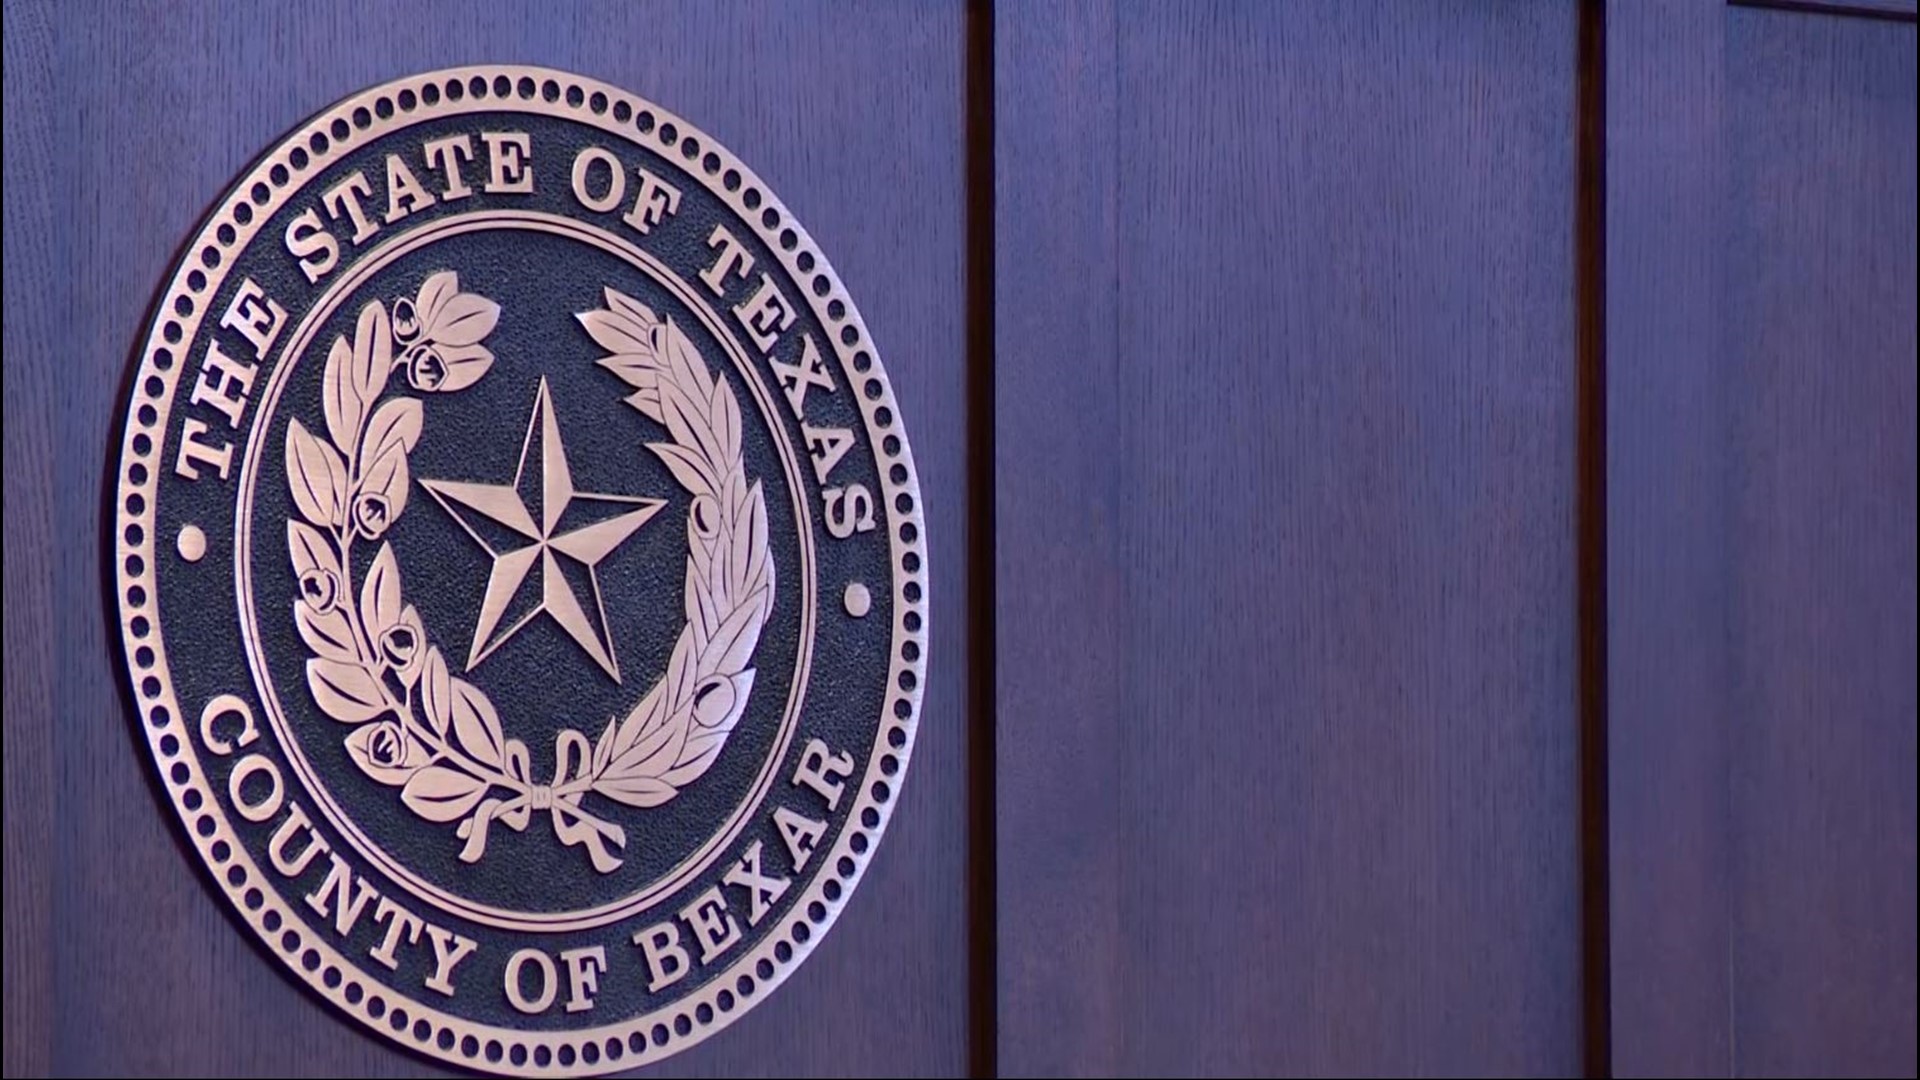 In 'historic' vote, Bexar County leaders unanimously OK pay raises for